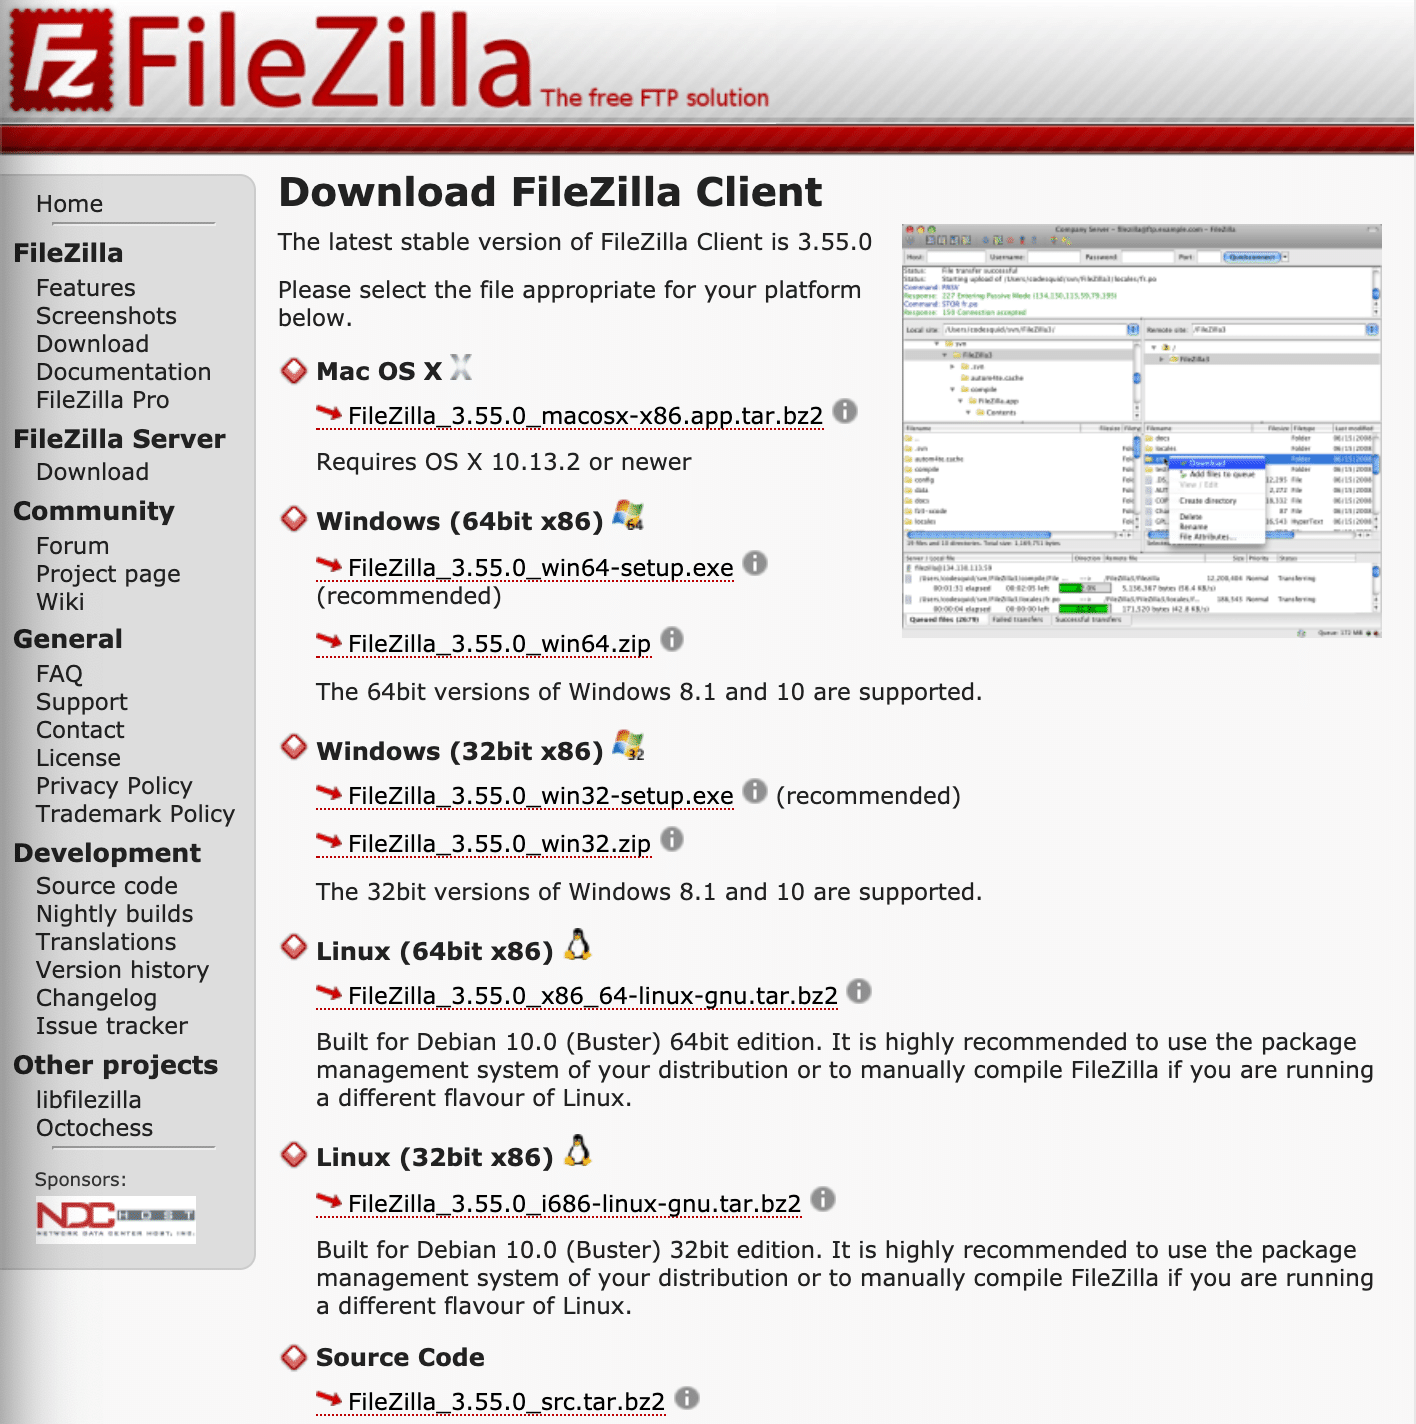 A page with all FileZilla versions and their Download links.